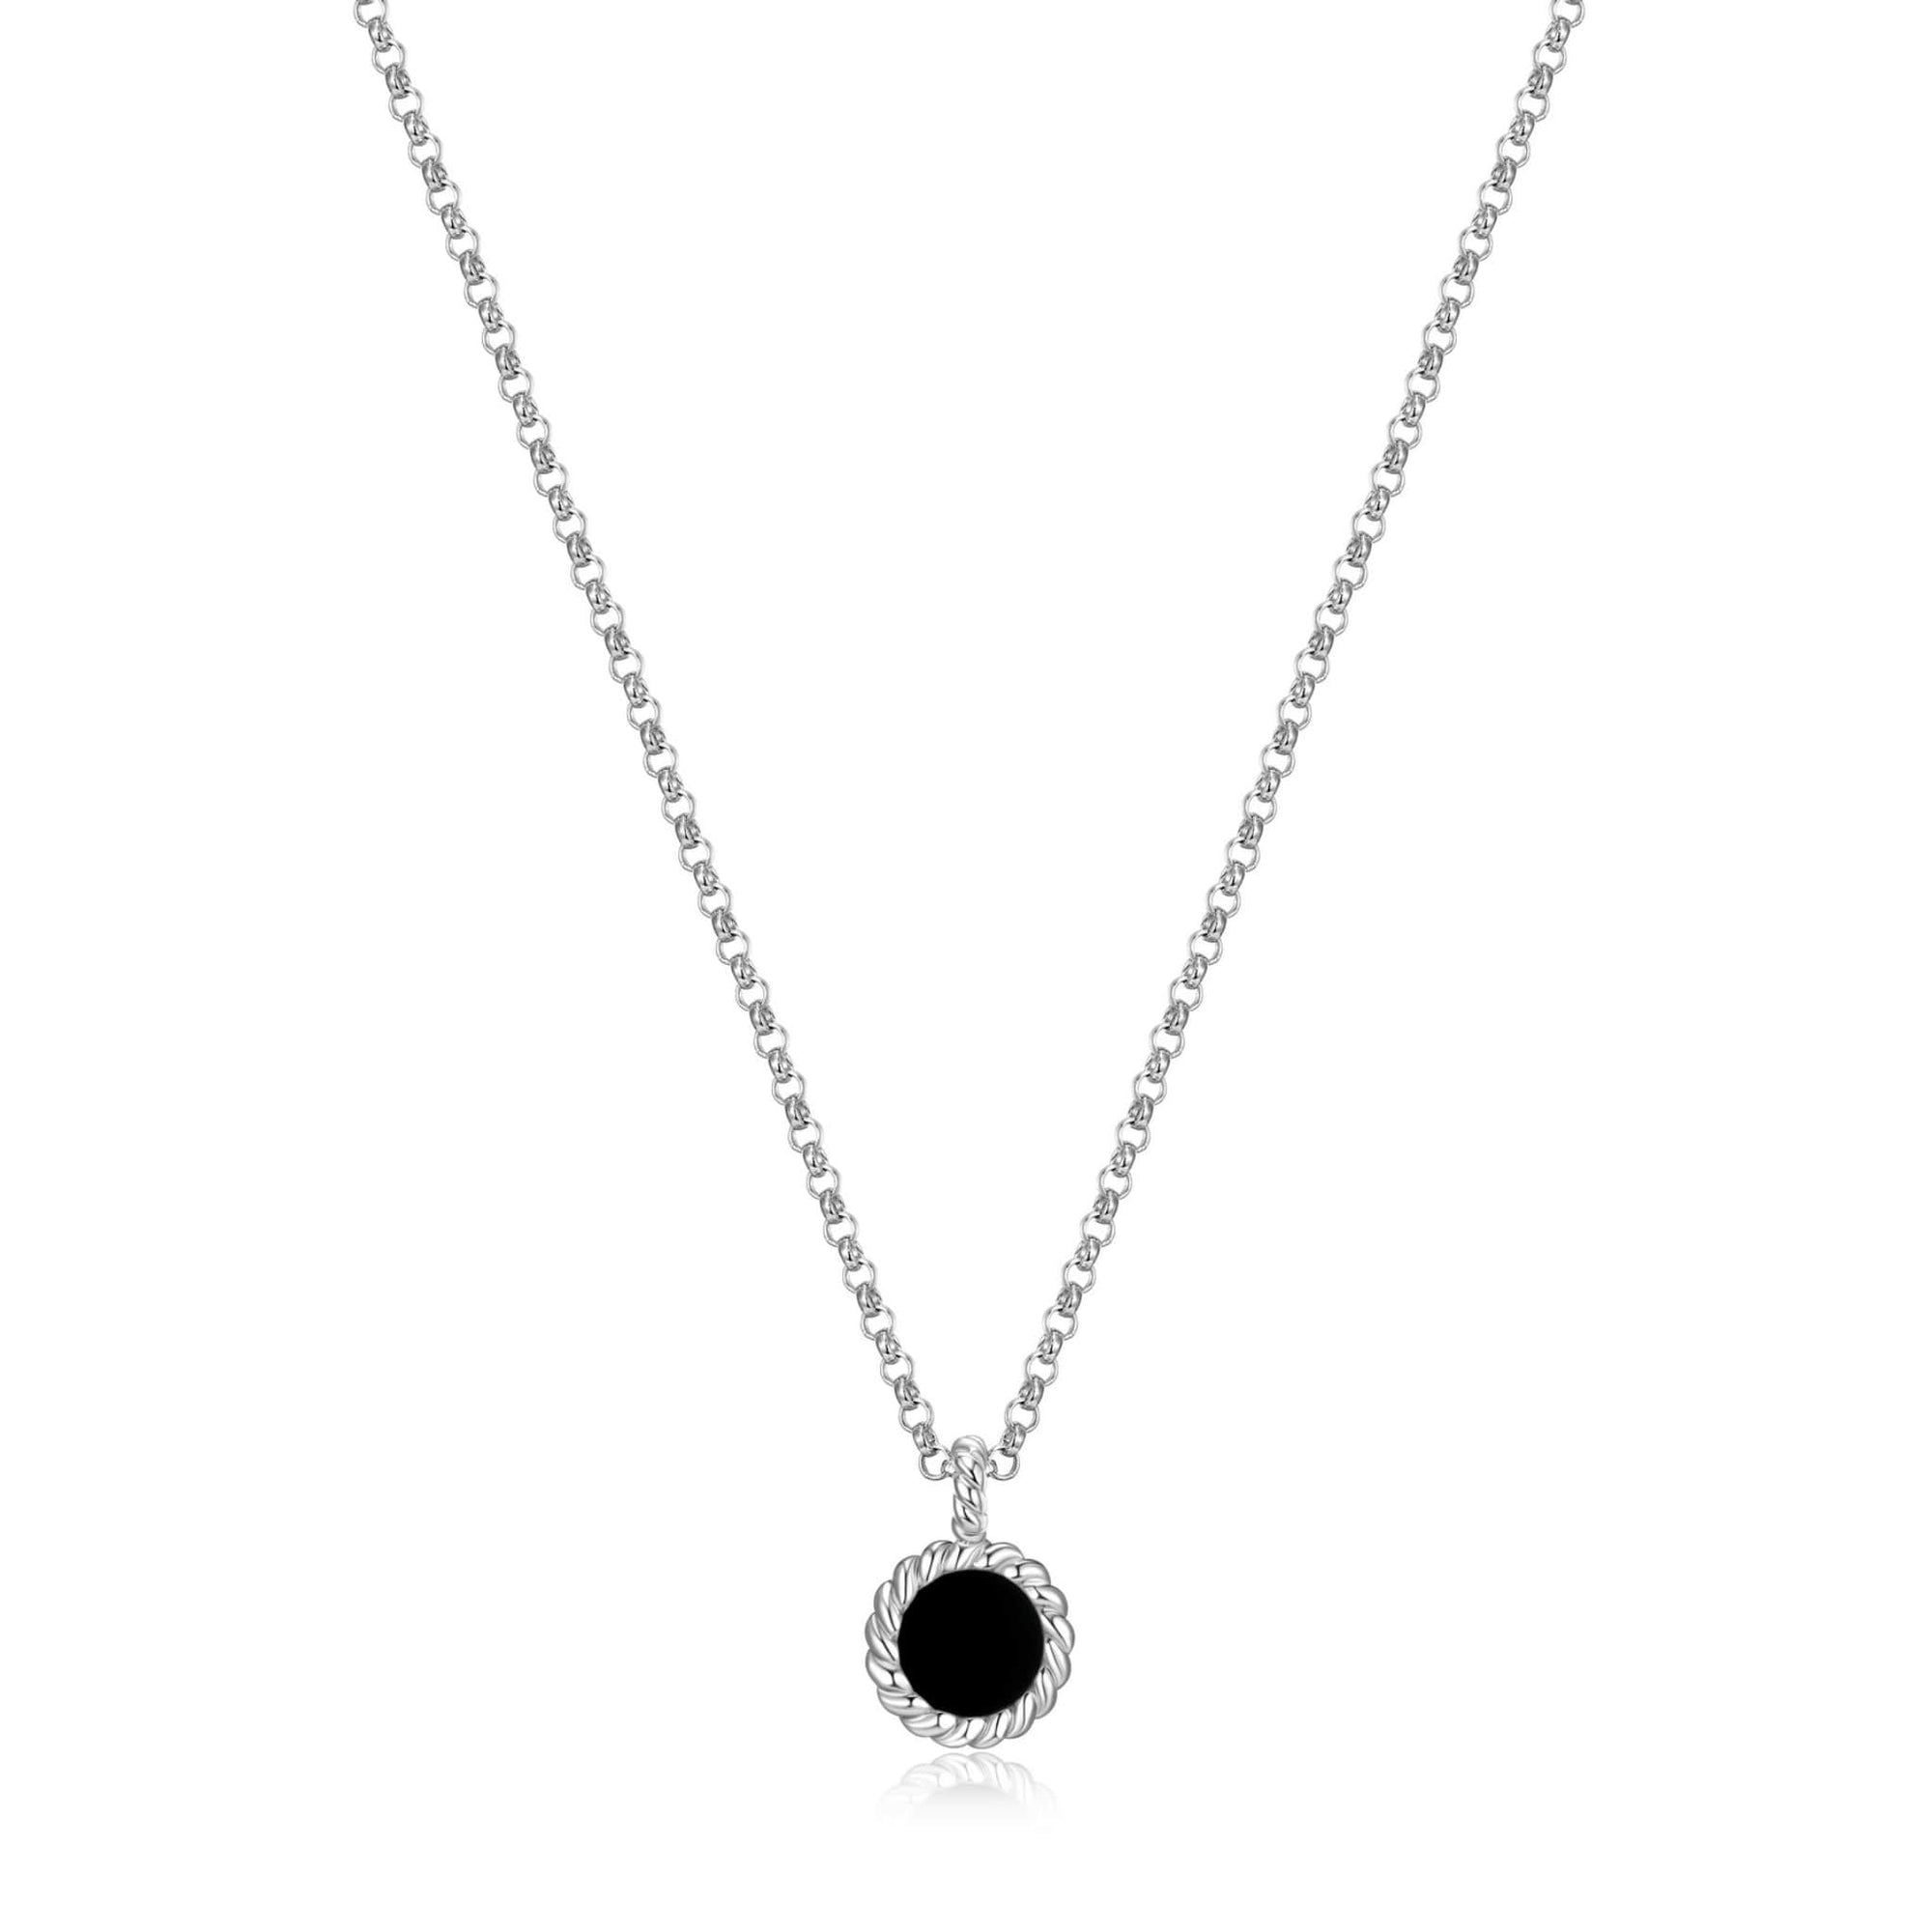 ELLE "Nautical" Black Agate Silver Necklace at Arman's Jewellers Kitchener